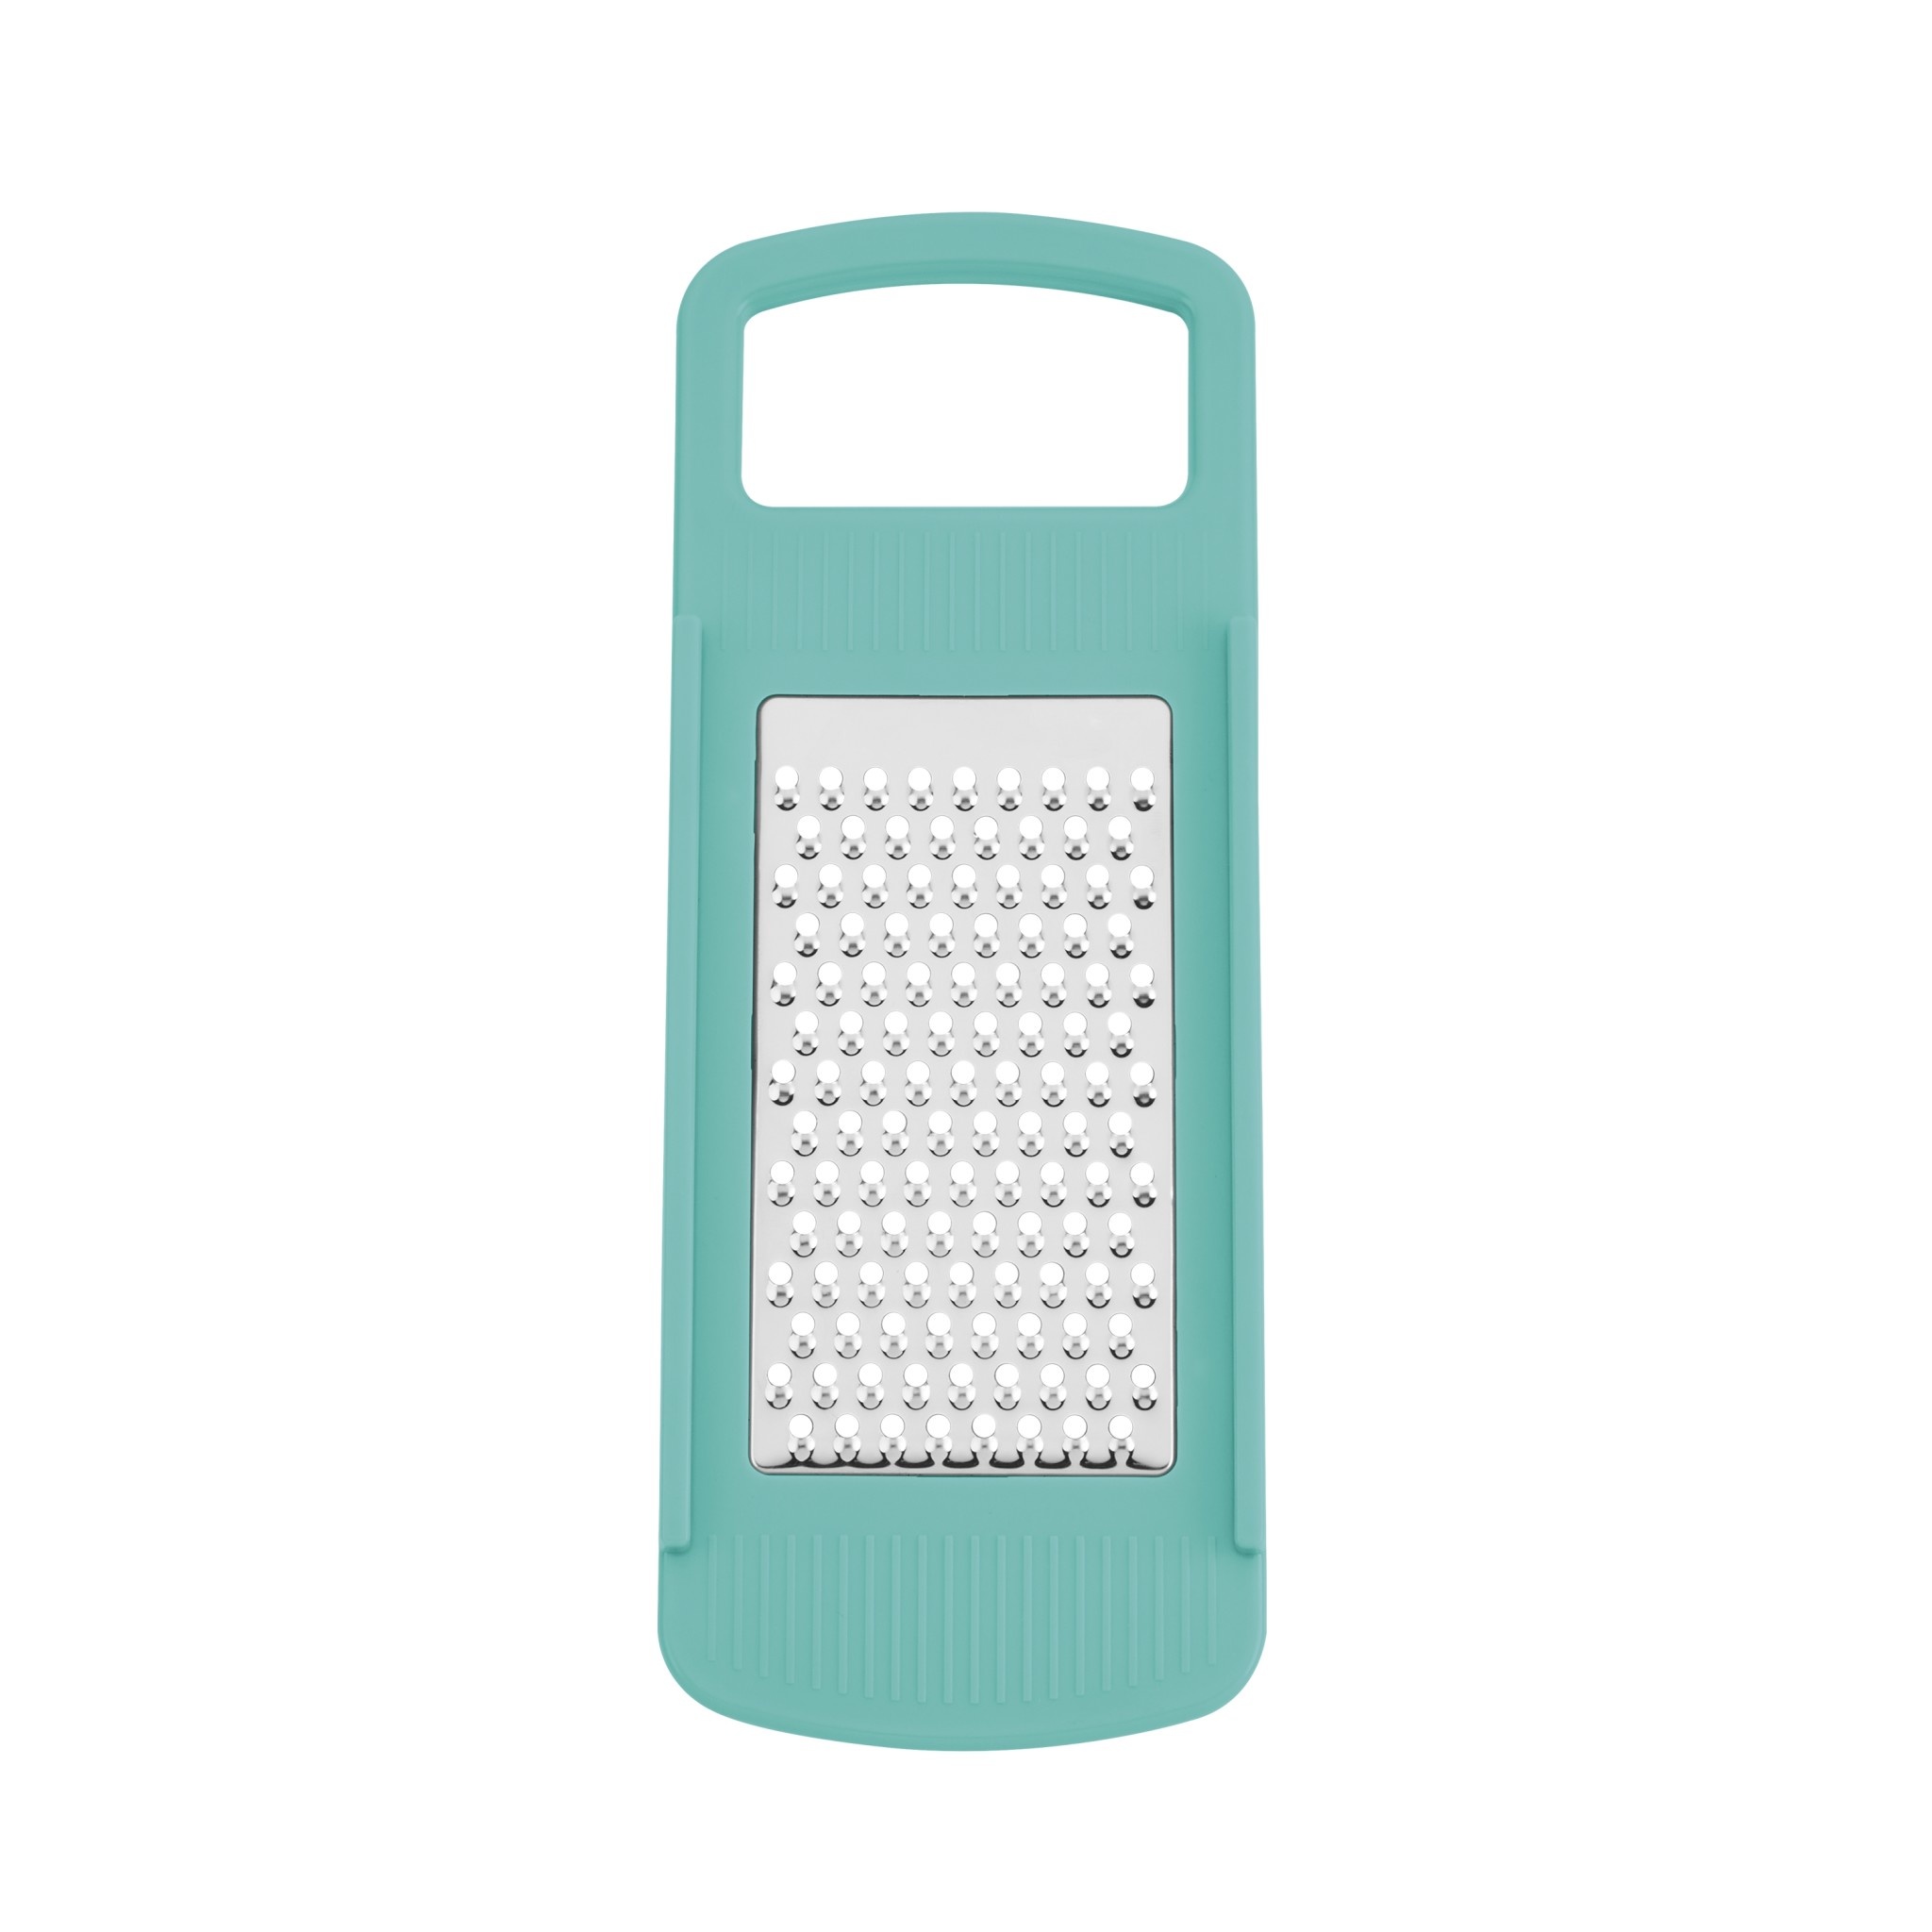 Kitchen gadget: Grate, collect and measure with the Cube Grater